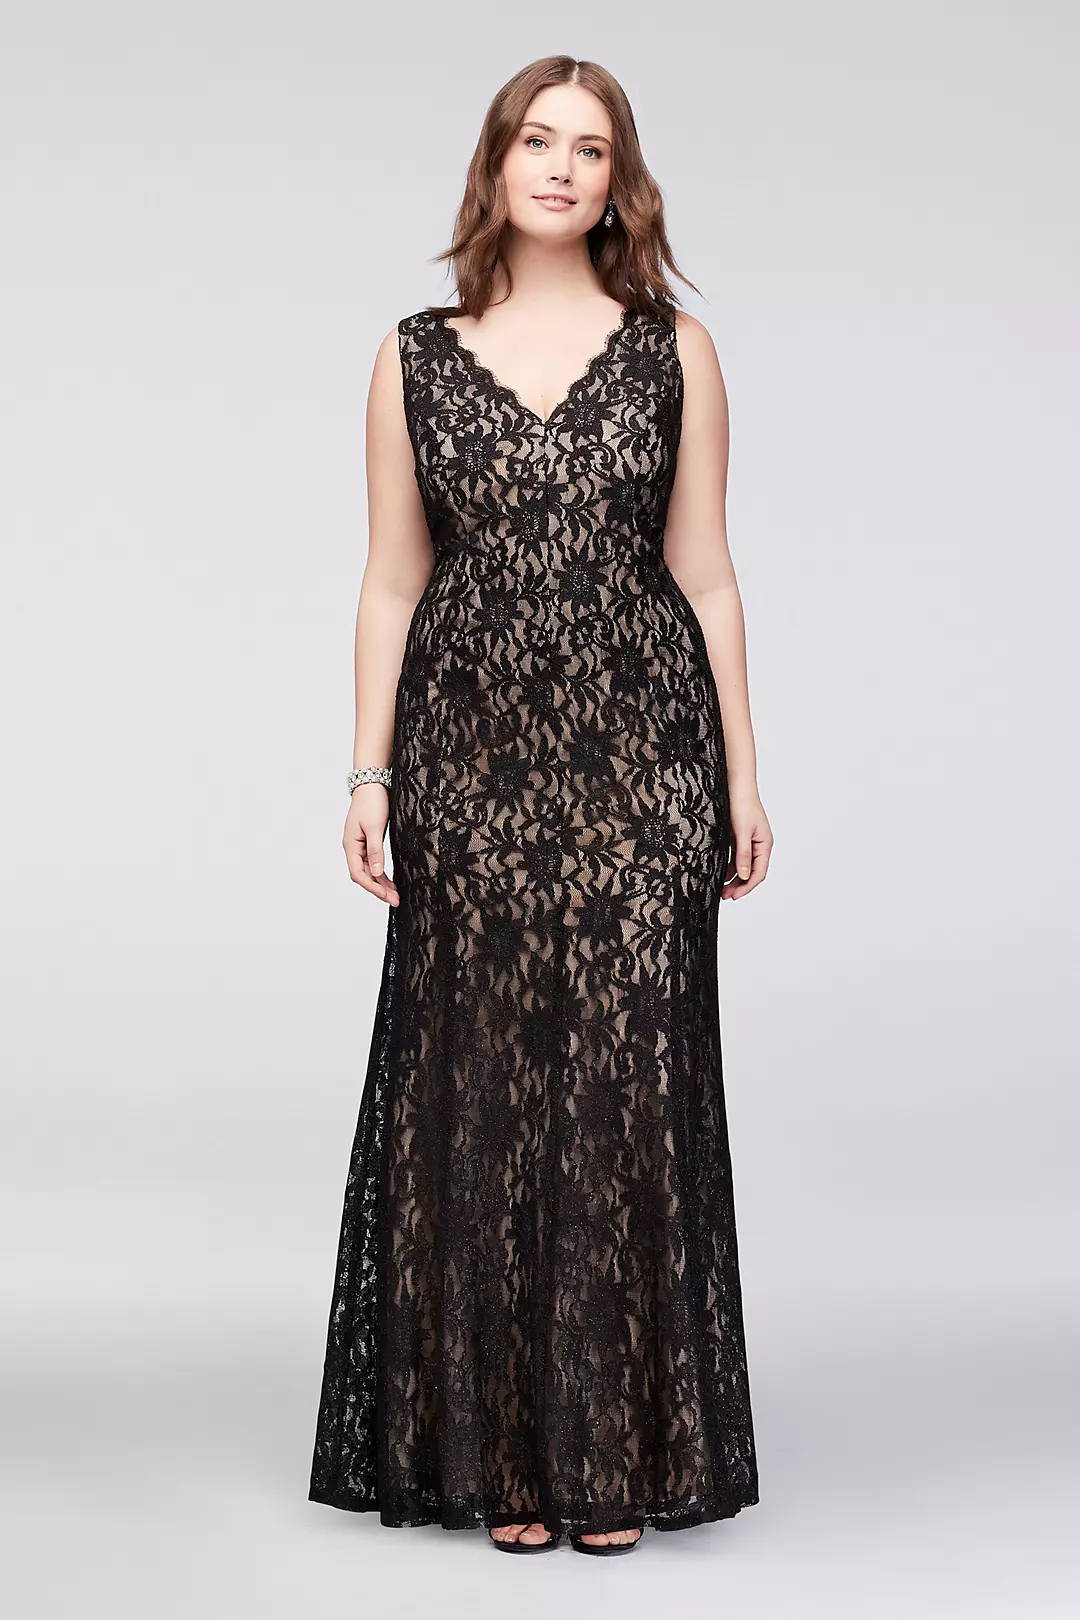 Allover Lace V-Neck Plus Size Sheath Gown Image